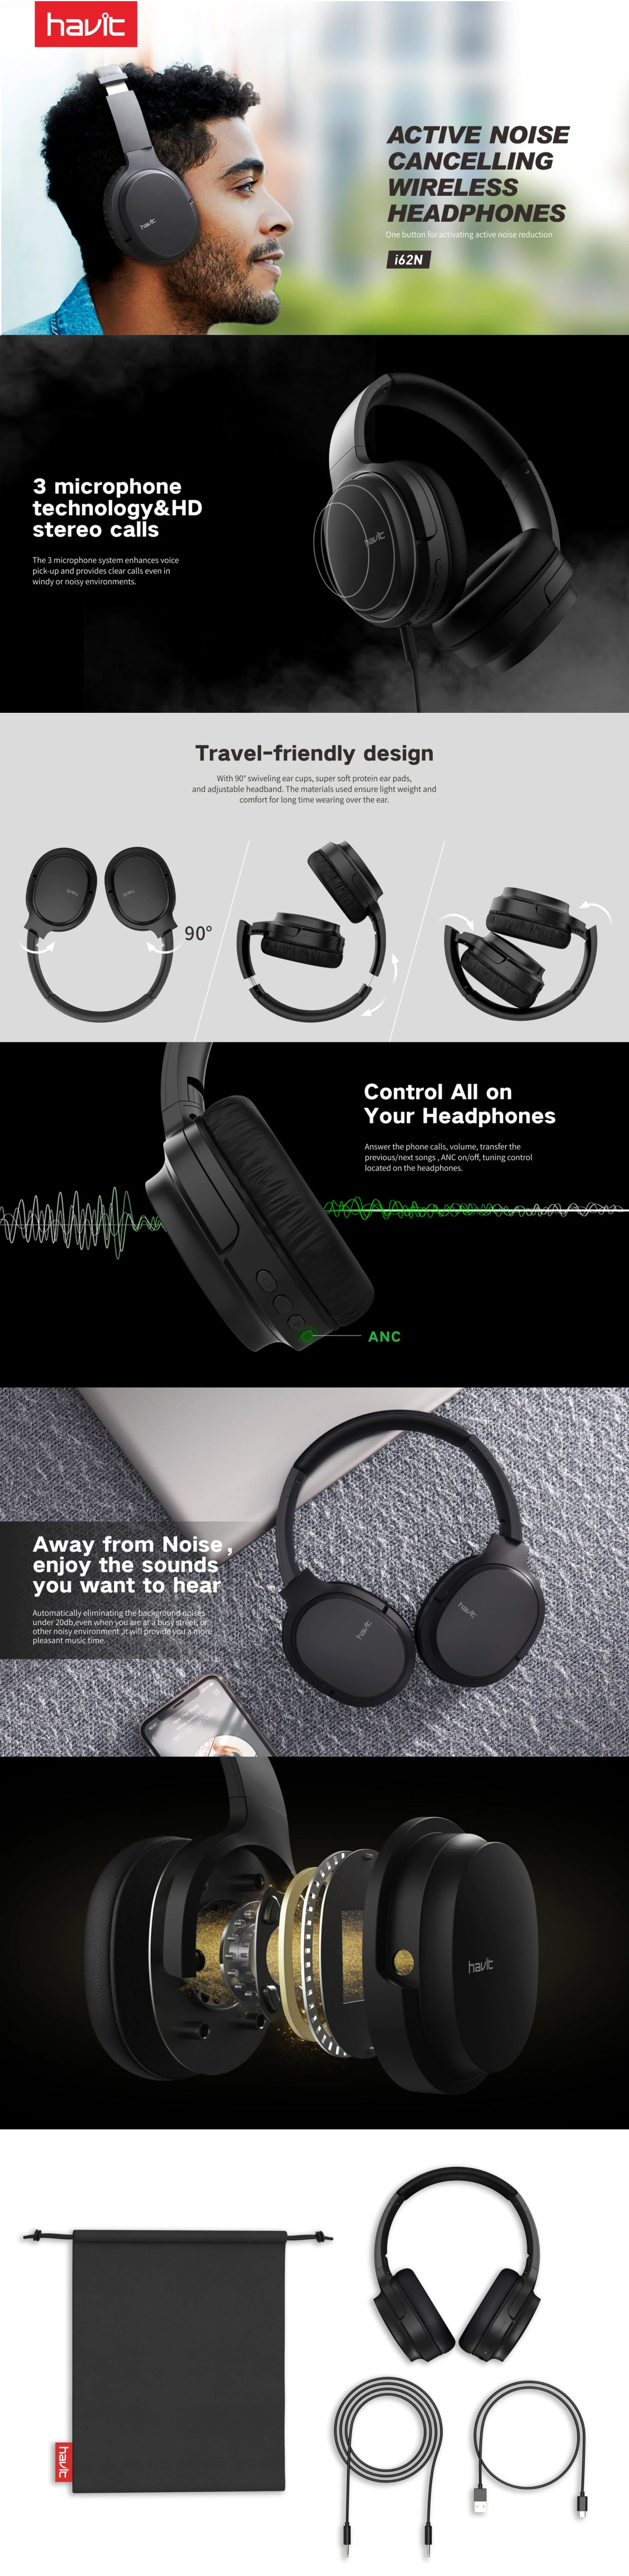 Overview - Havit - I62N Active Noise Cancelling Wireless Bluetooth Headset